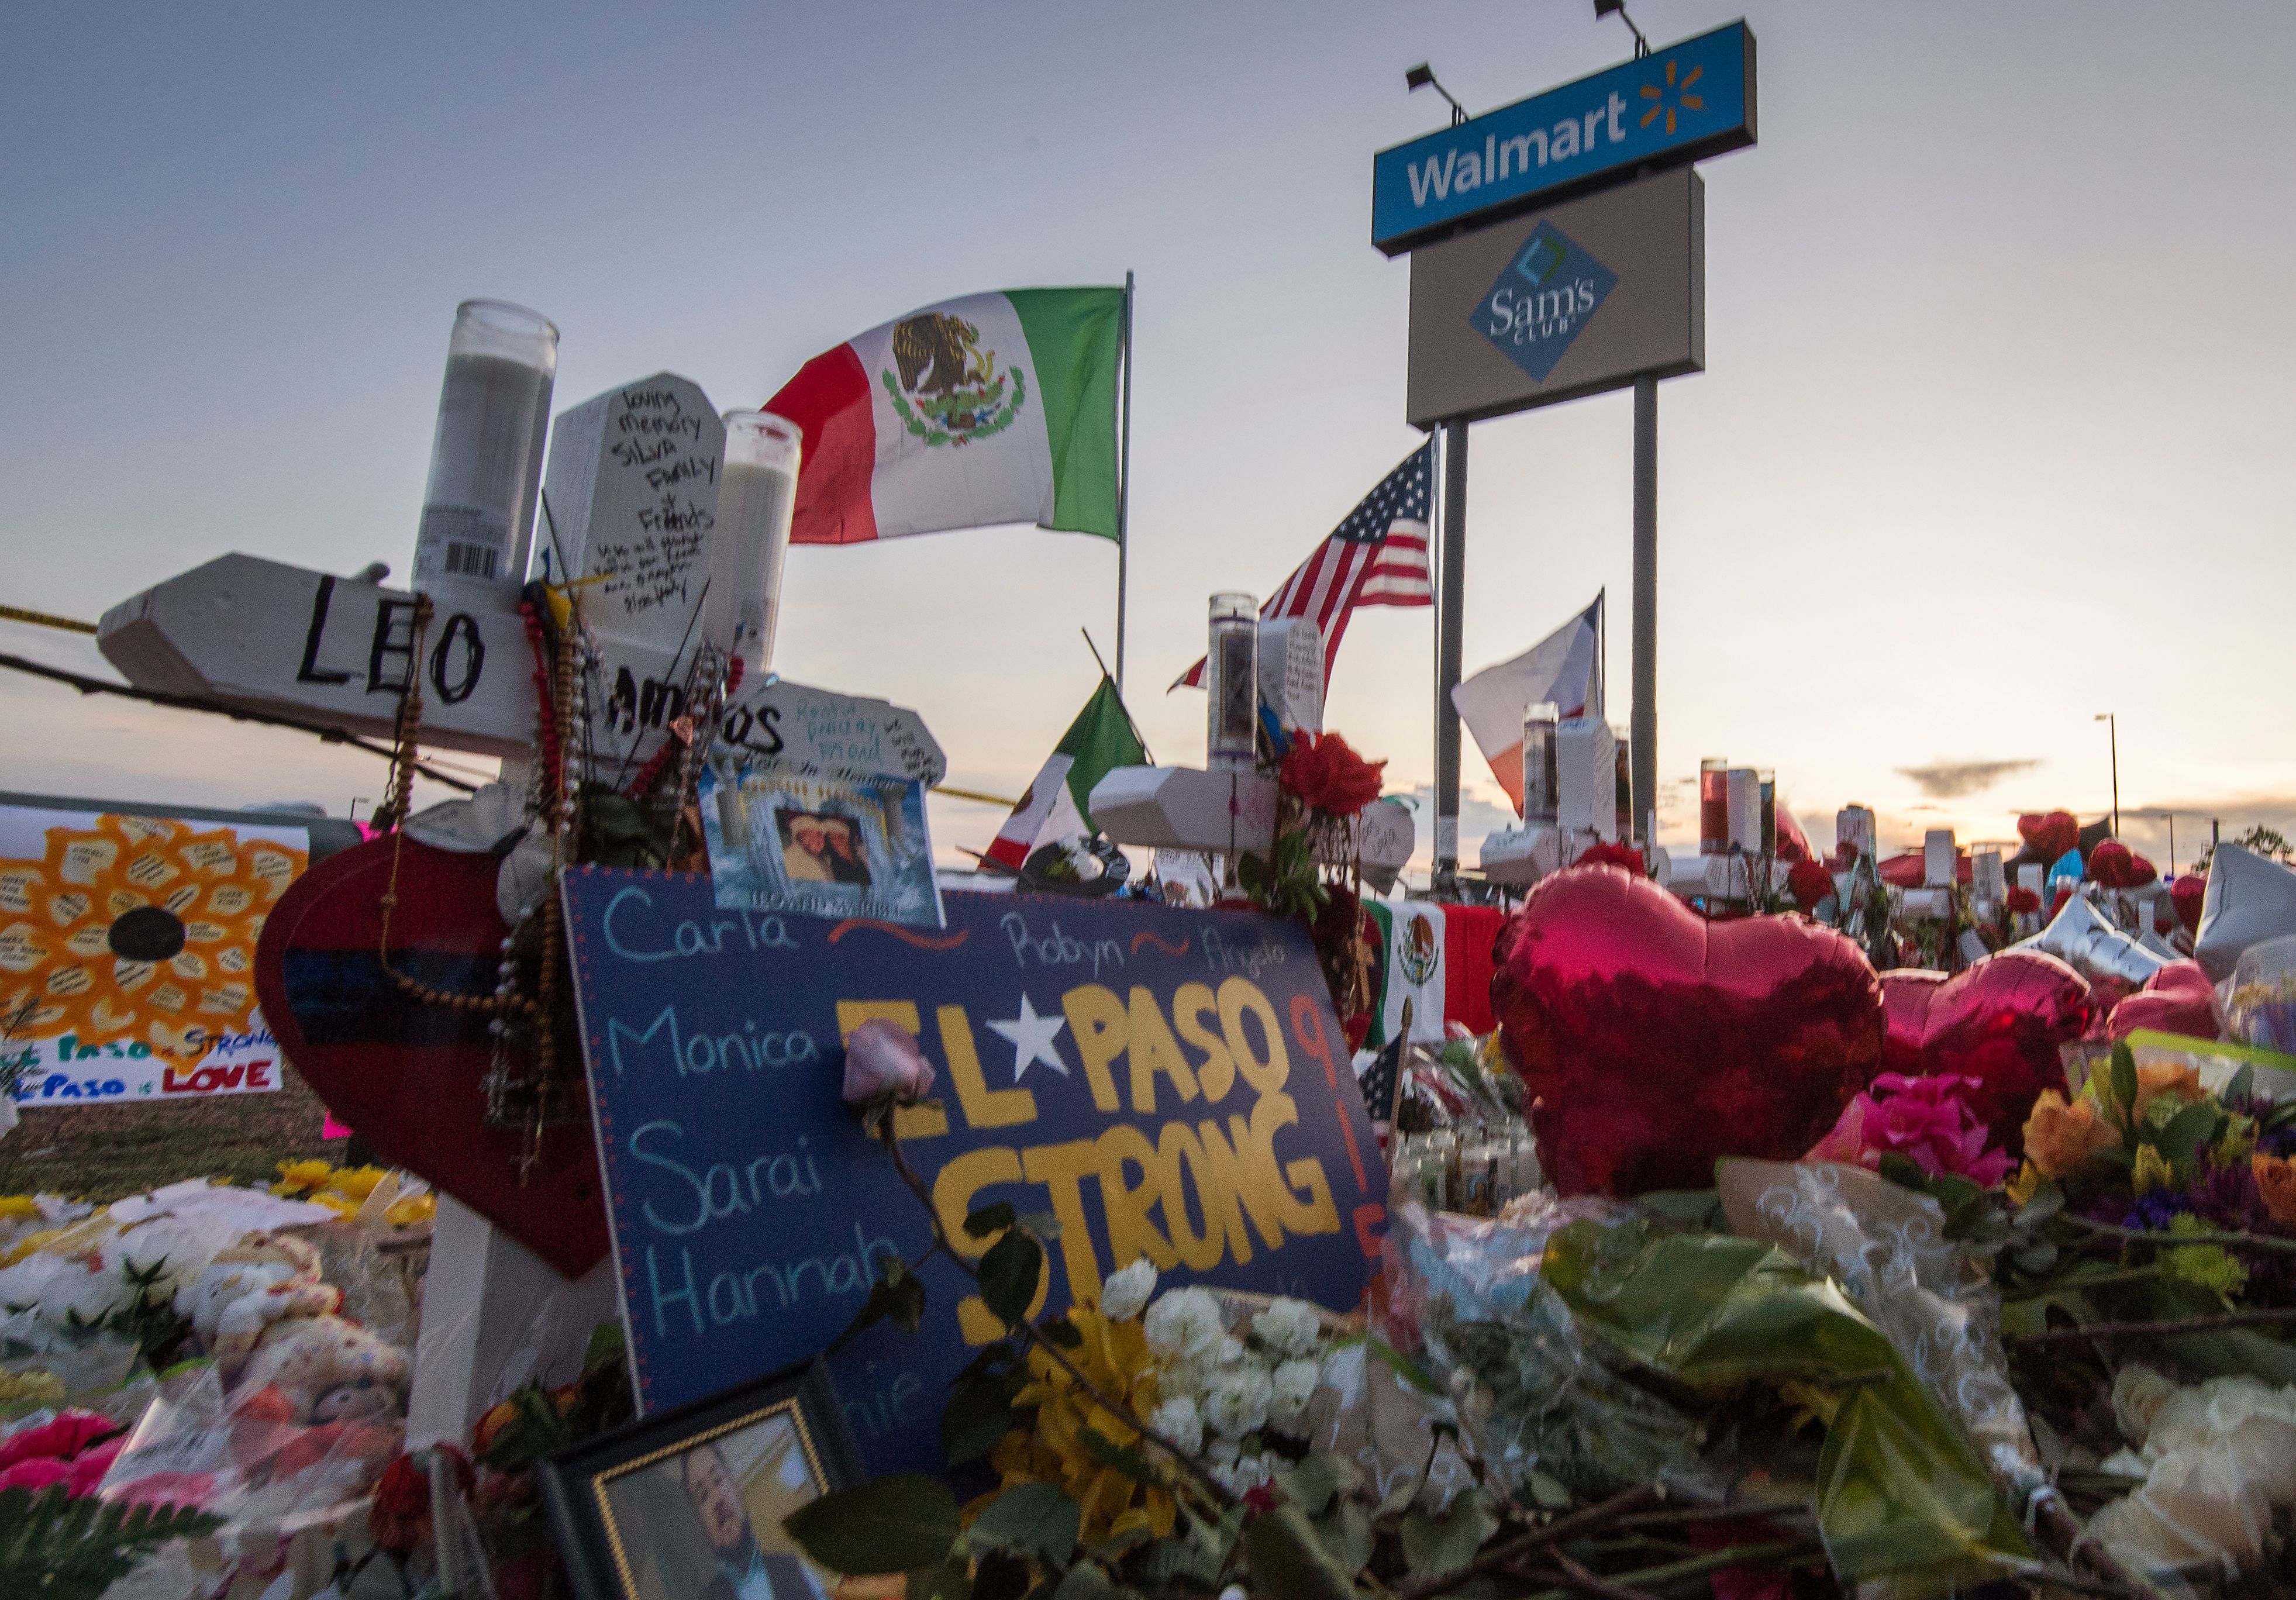 People pray and pay their respects at the makeshift memorial for victims of the shooting that left a total of 22 people dead at the Cielo Vista Mall WalMart (background) in El Paso, Texas, on August 6, 2019 (Mark RALSTON / AFP / Getty Images)